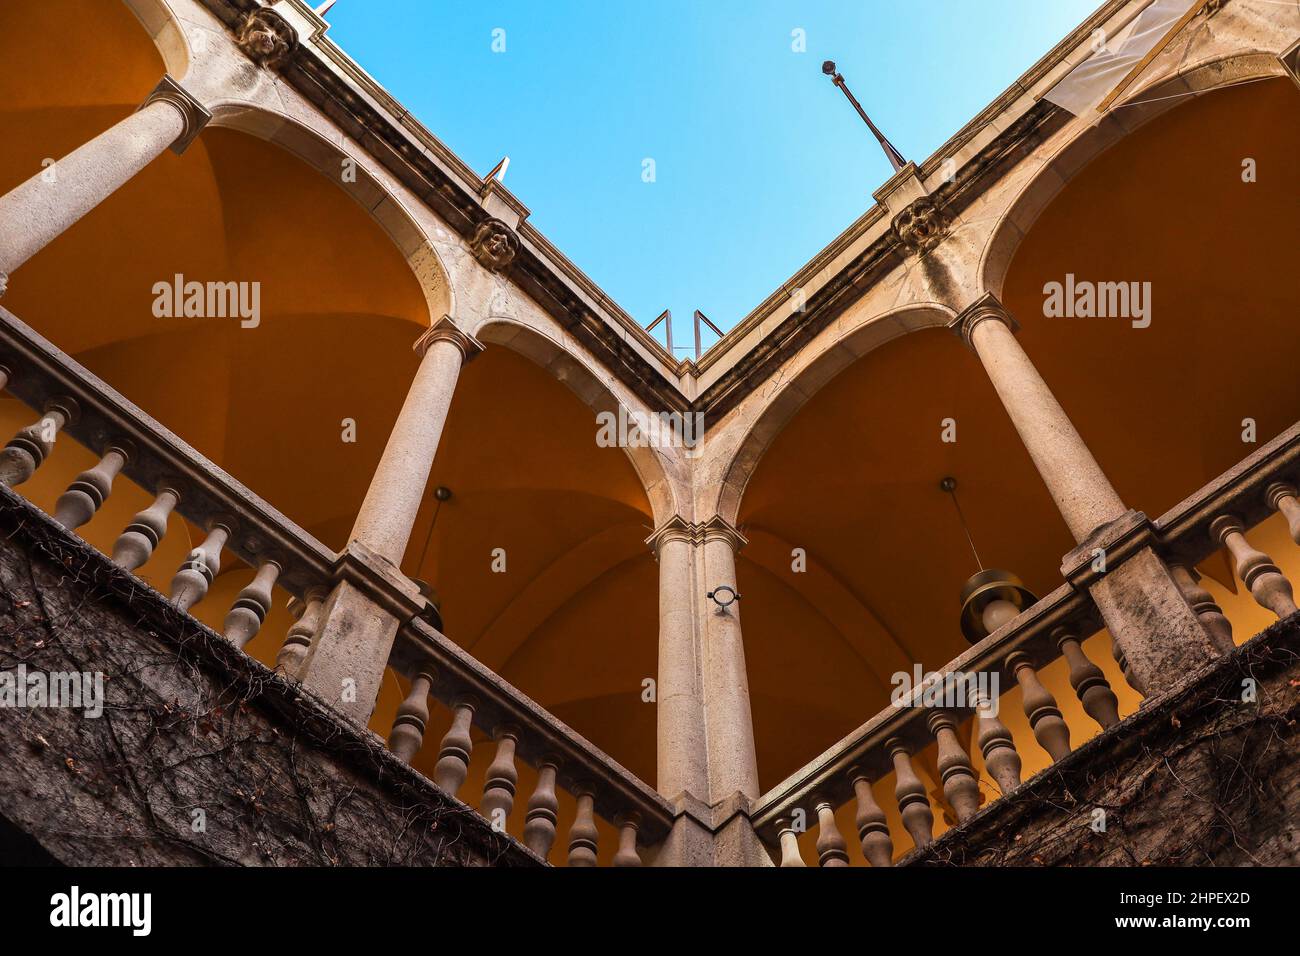 Look Up at Balcony with Columns in Palau del Lloctinent with Blue Sky in Barcelona. Architecture of Palace of the Viceroy. Stock Photo